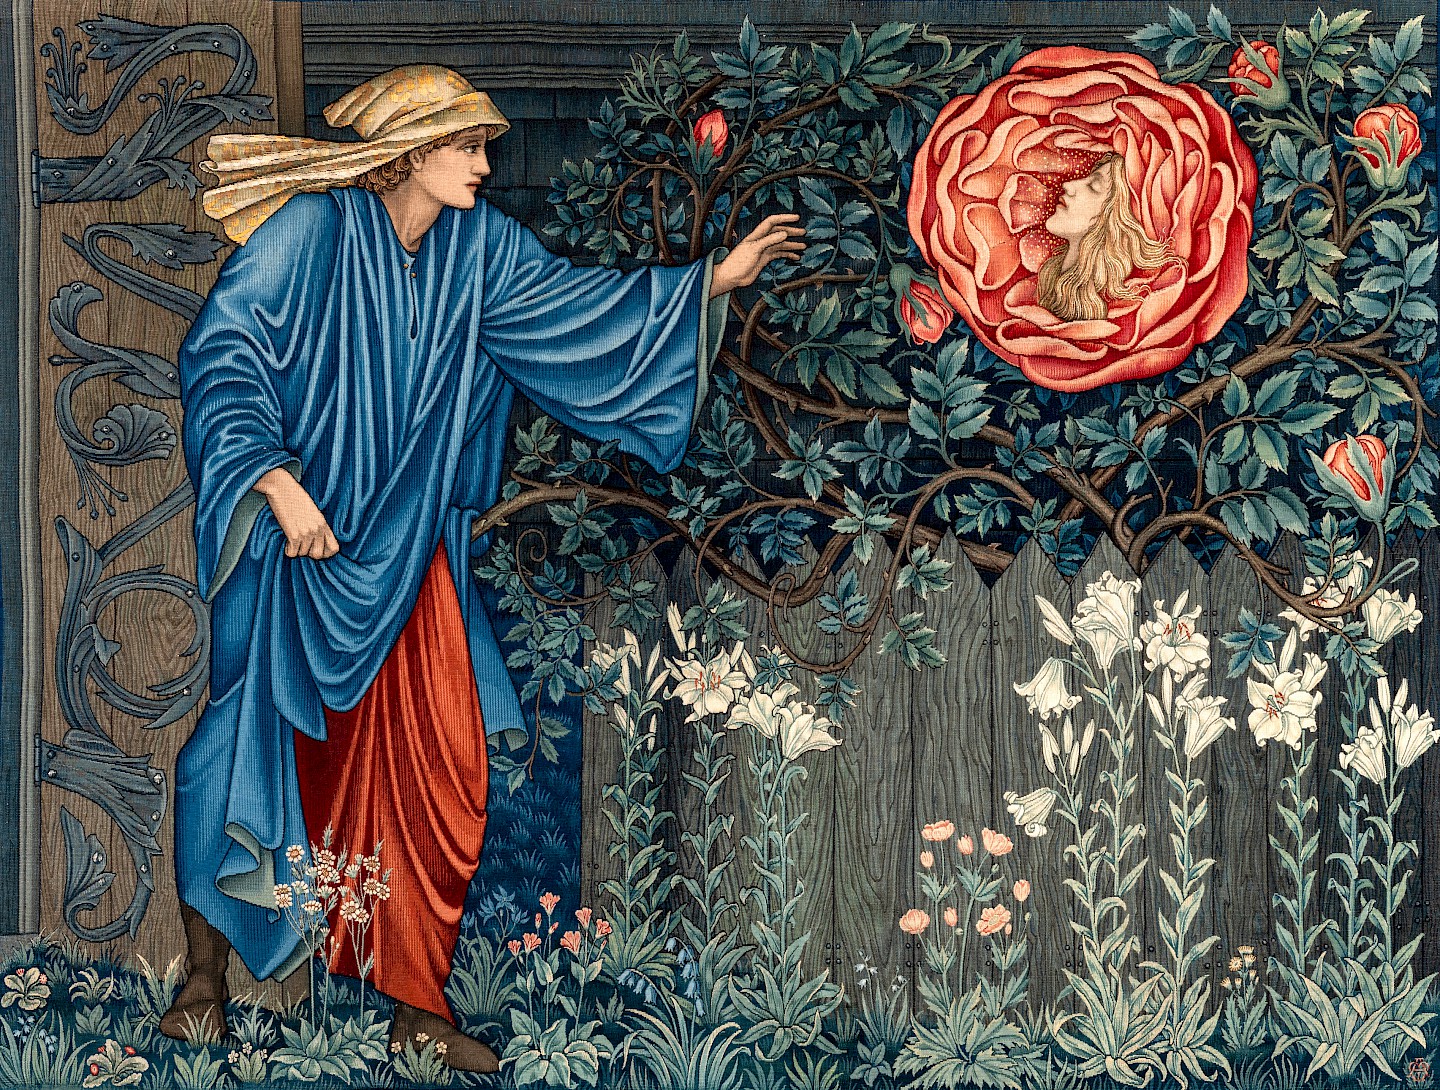 The tapestry shows a pilgrim in the garden with a large rose.